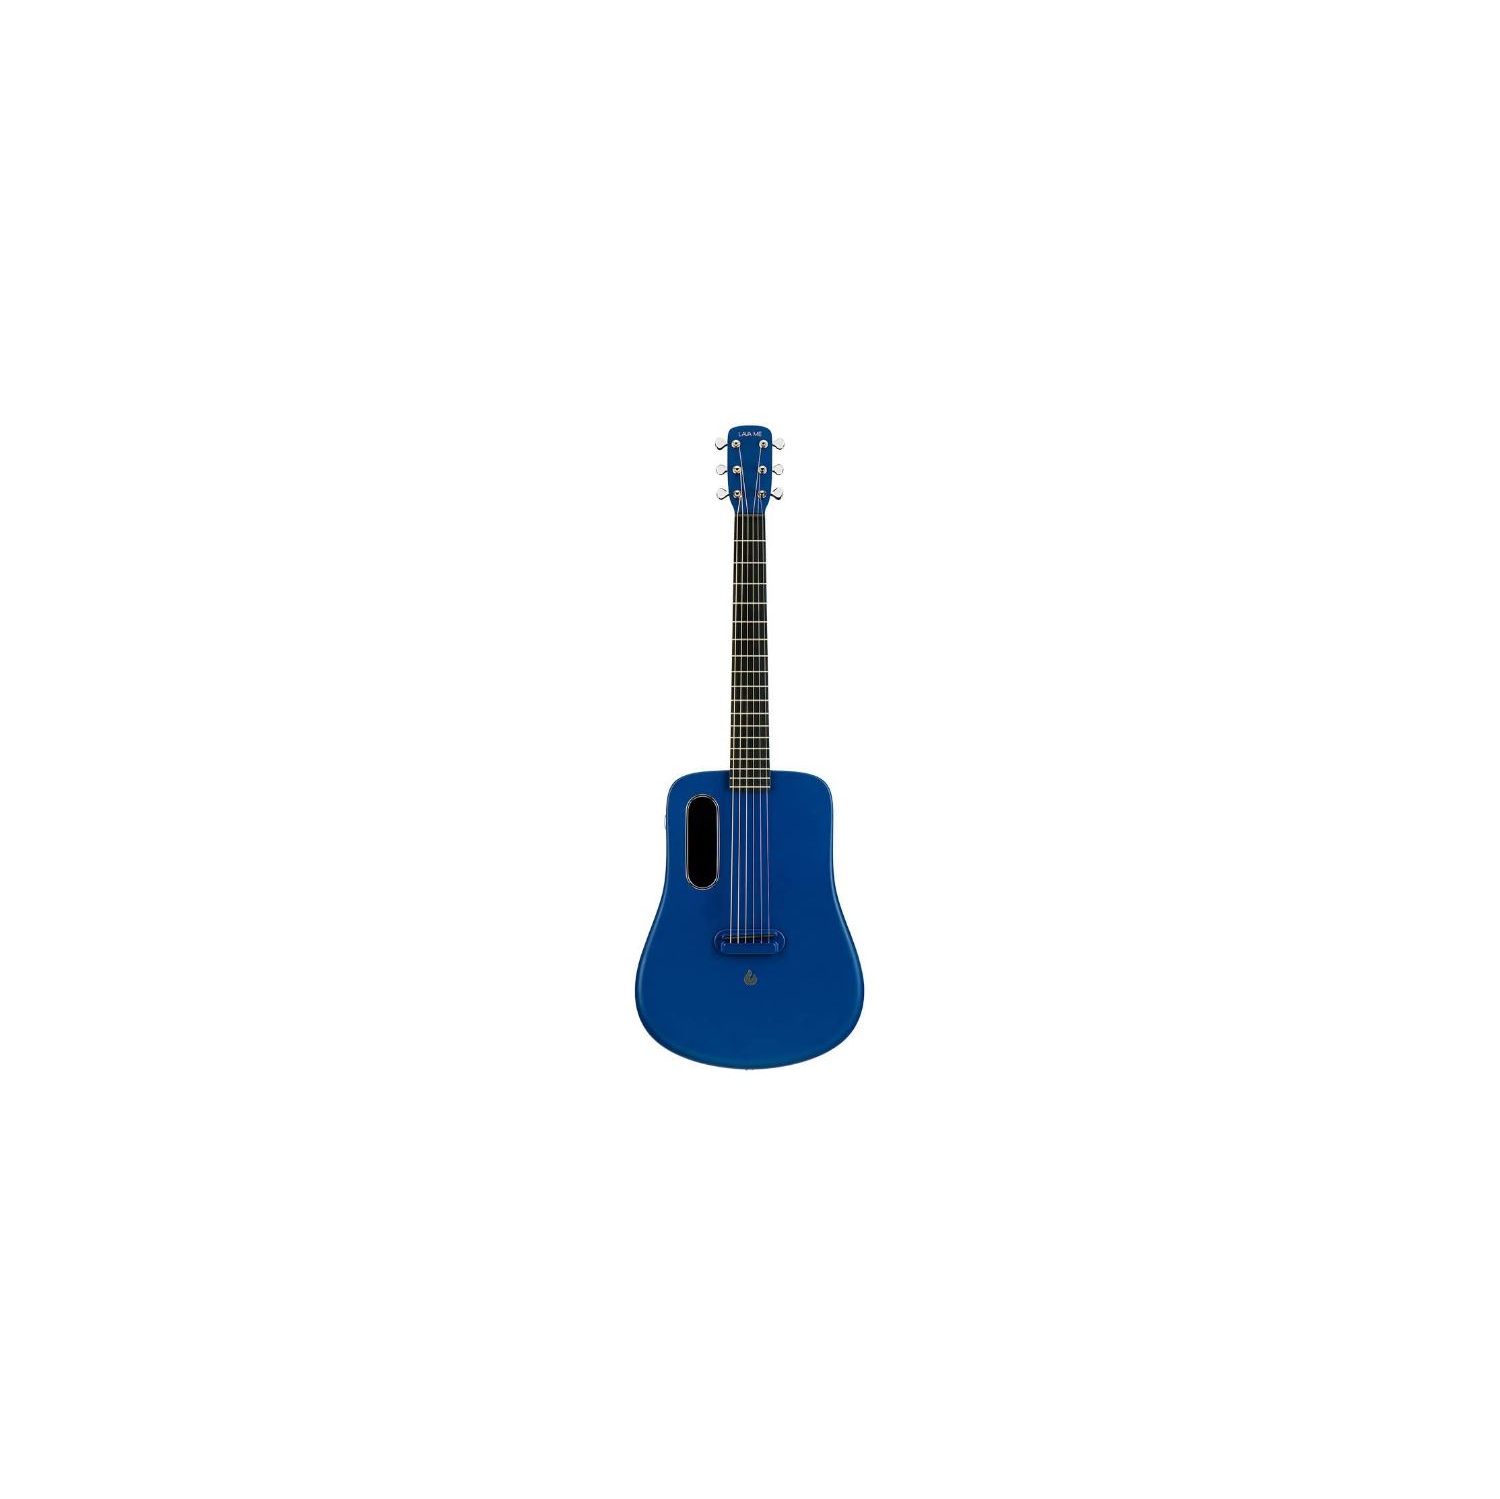 Open Box - LAVA ME 2 Carbon Fiber Guitar with Bag Picks and Charging Cable (Freeboost-Blue)